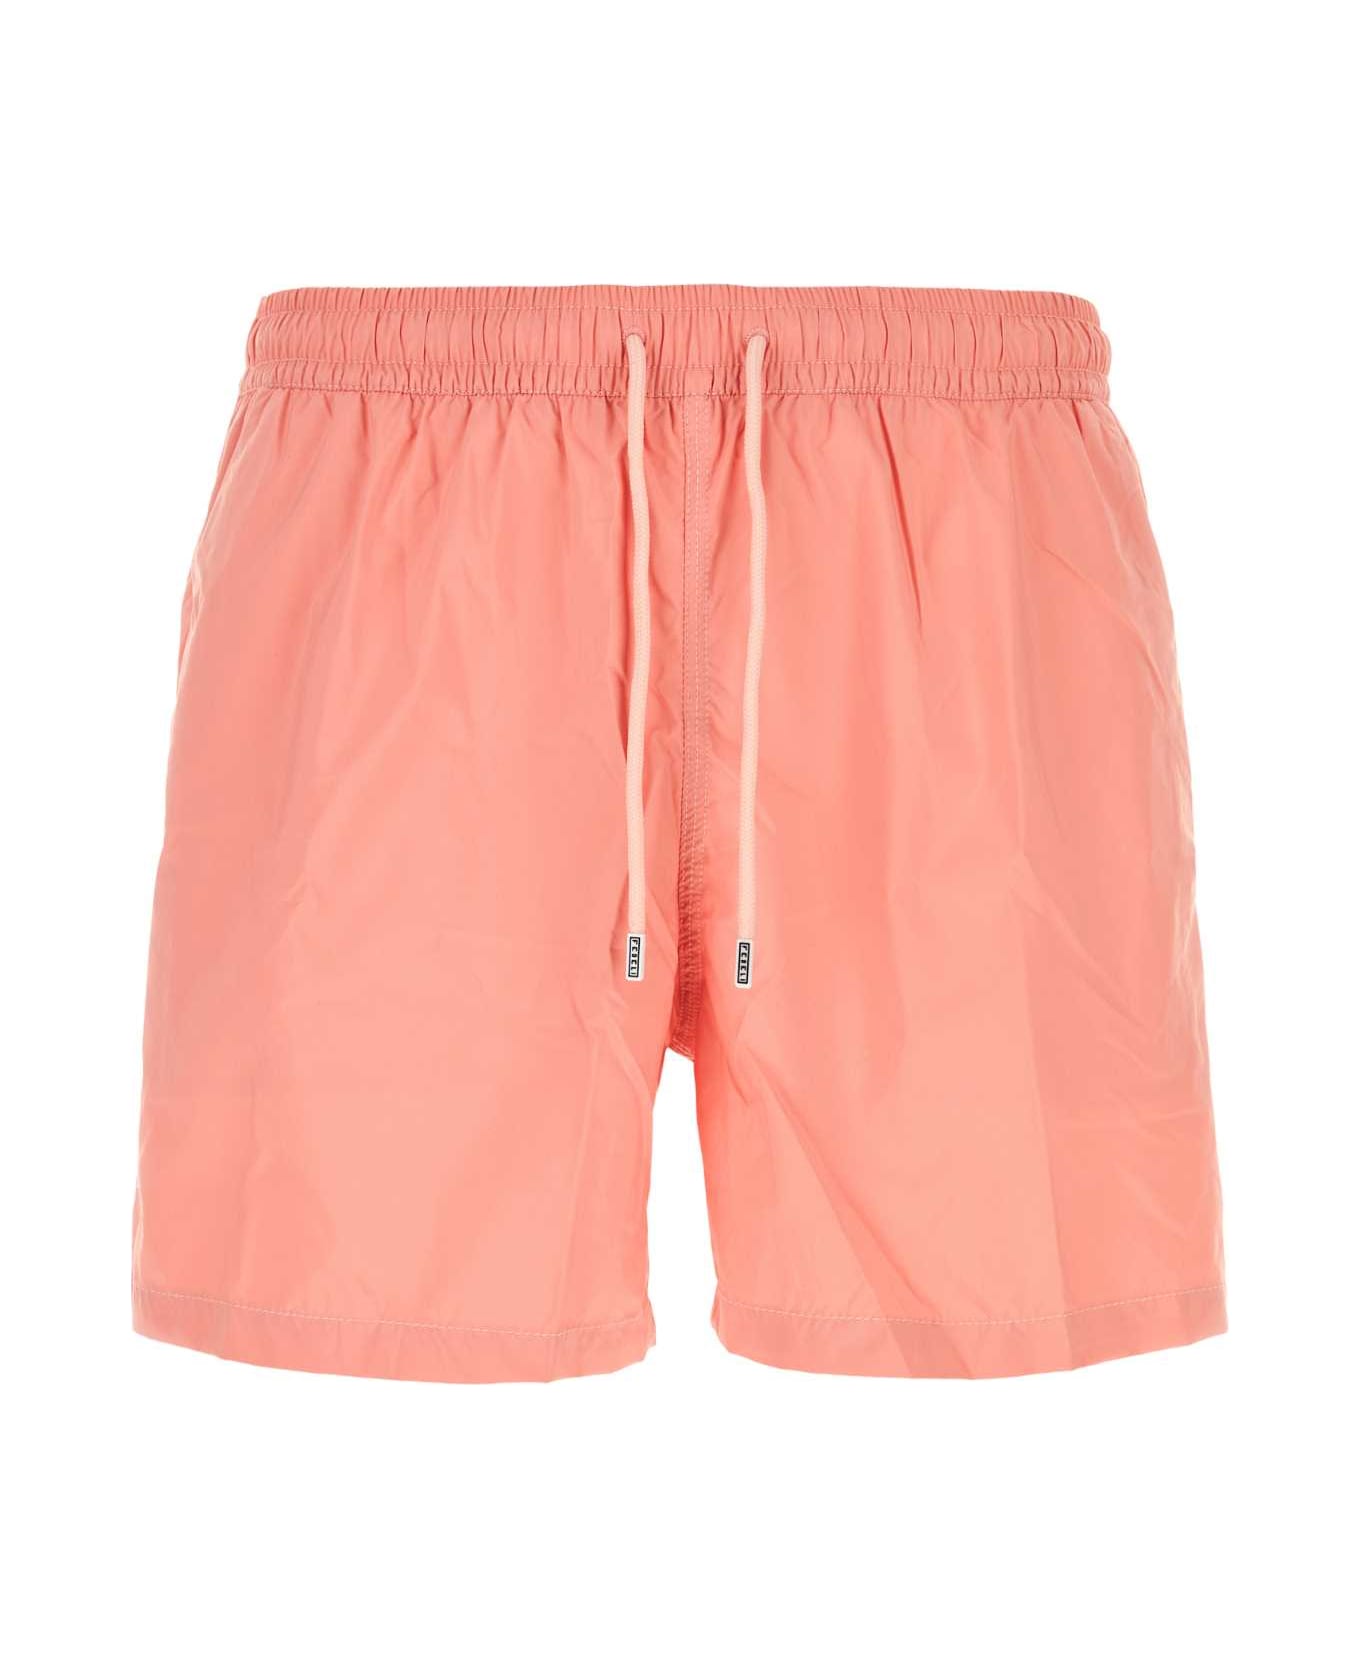 Fedeli Pink Polyester Swimming Shorts - ROSA